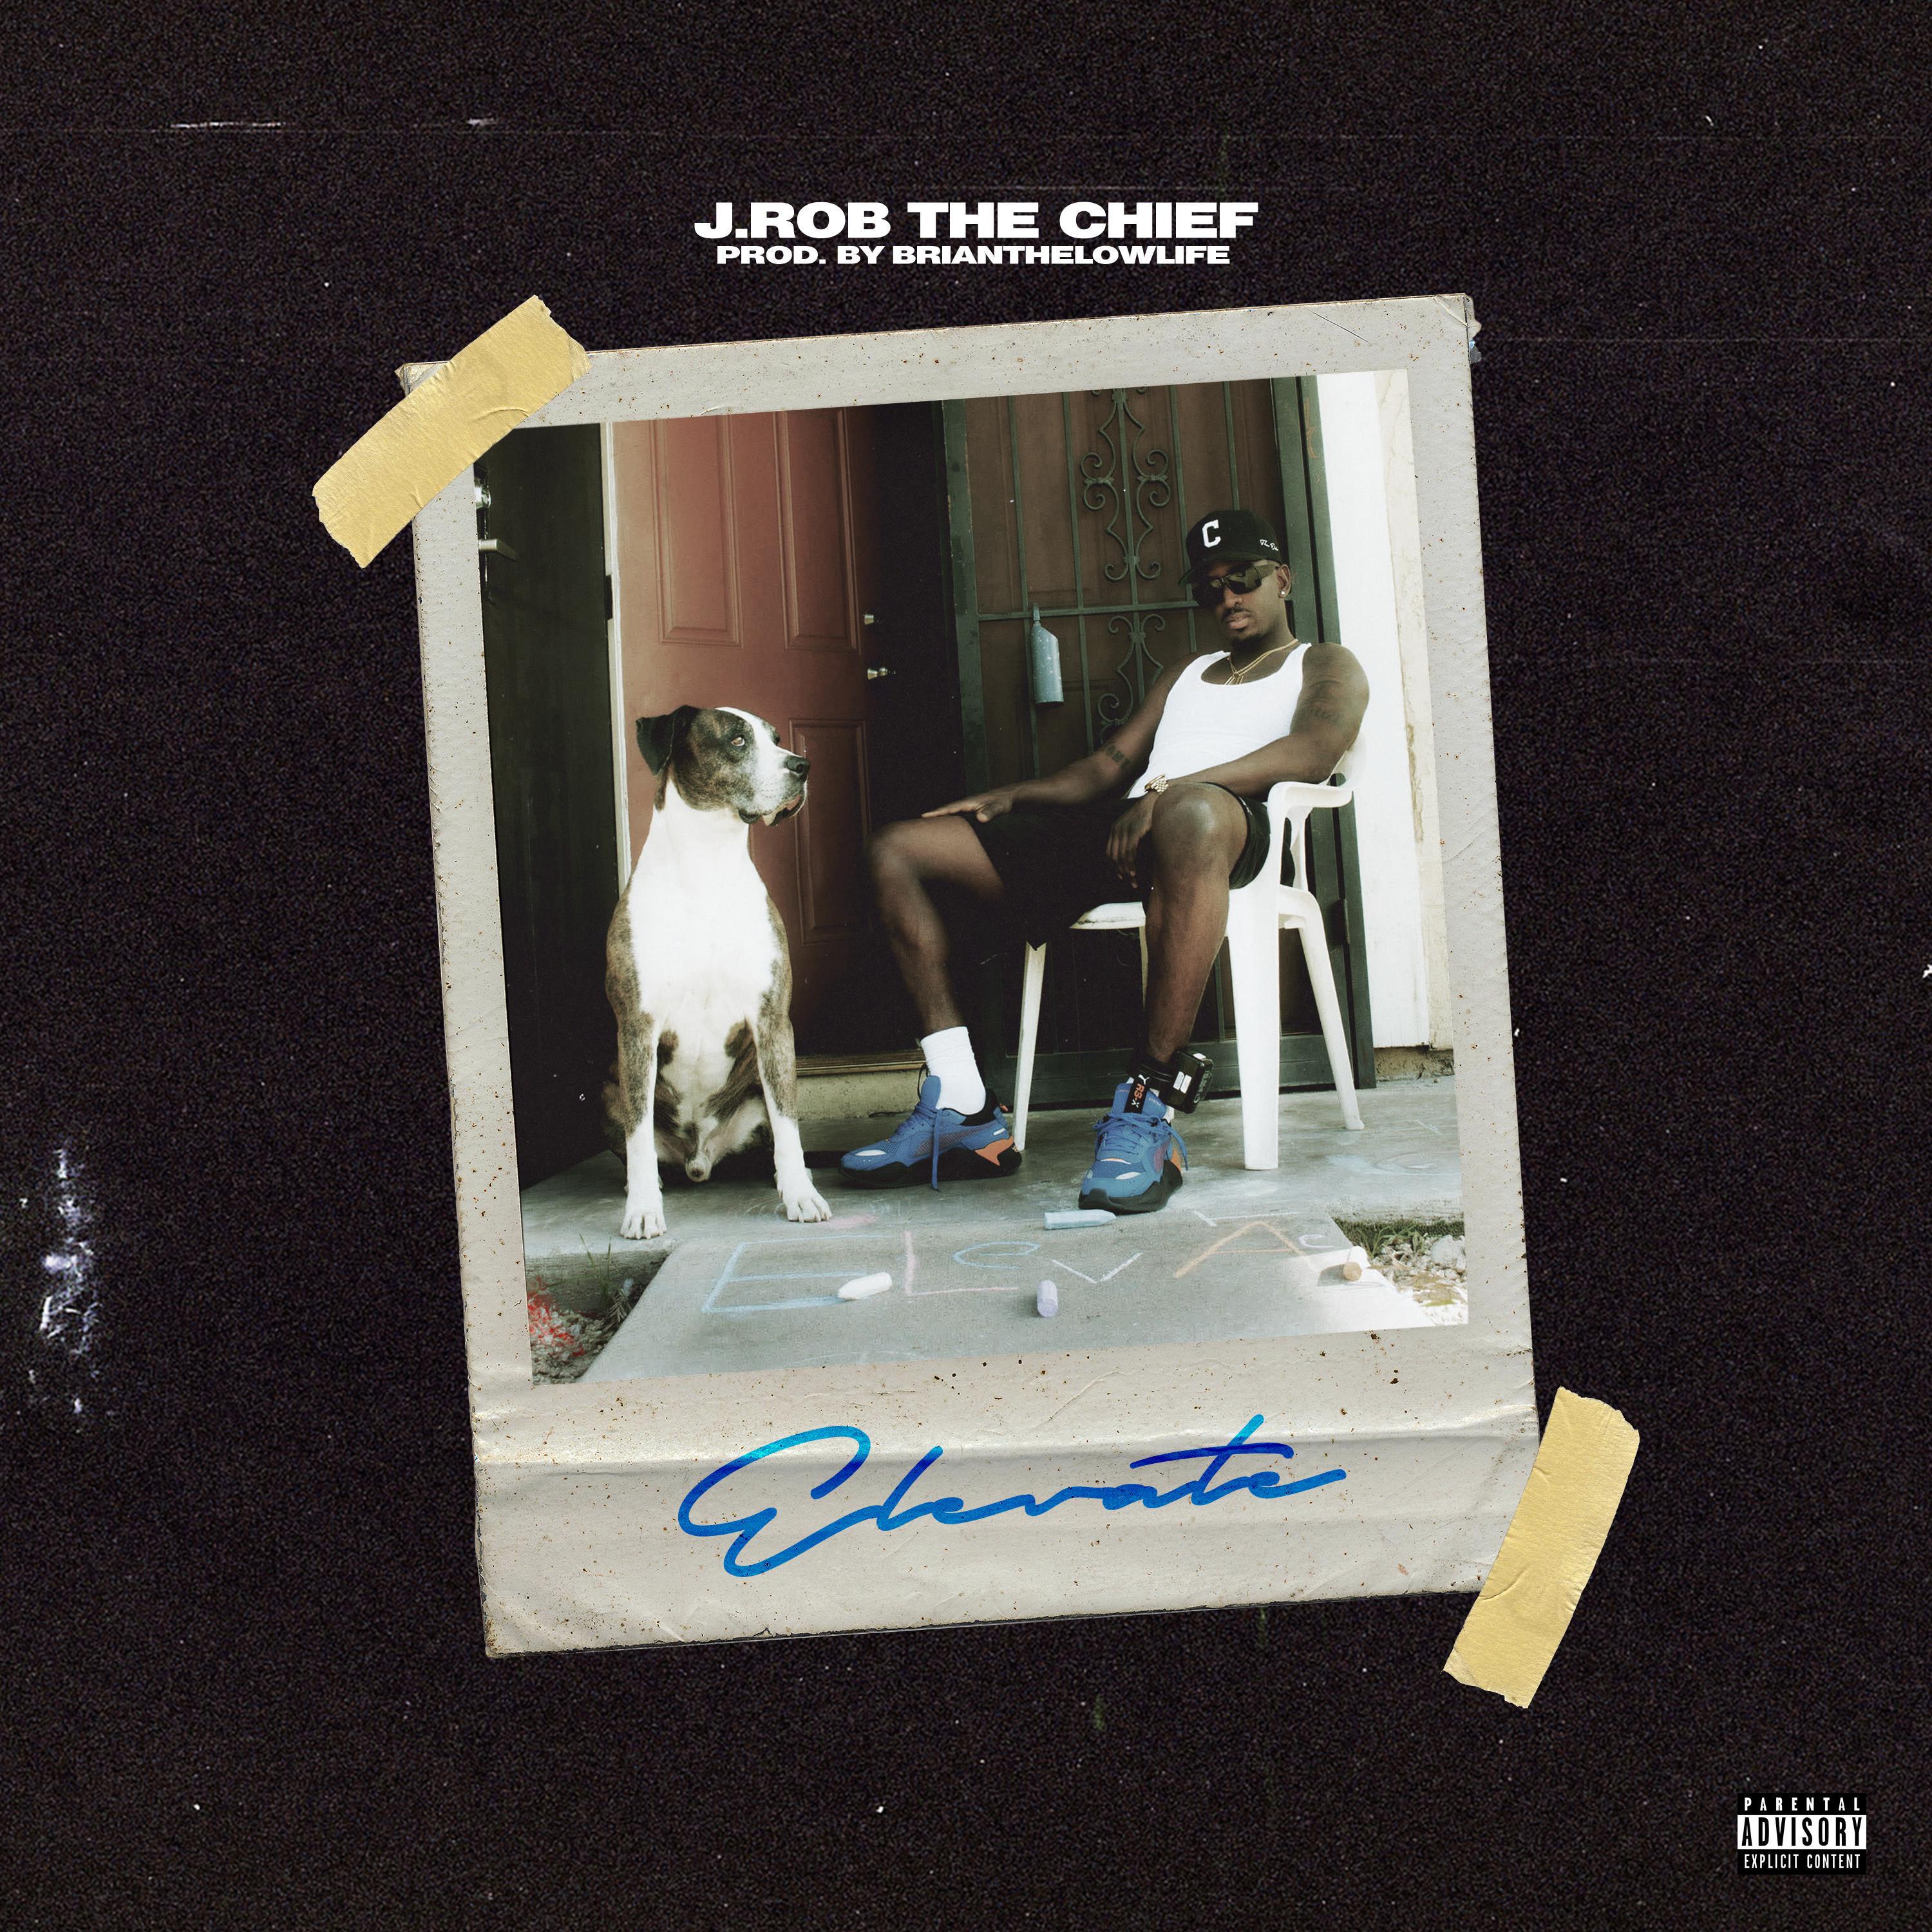 J.Rob The Chief - The Crown